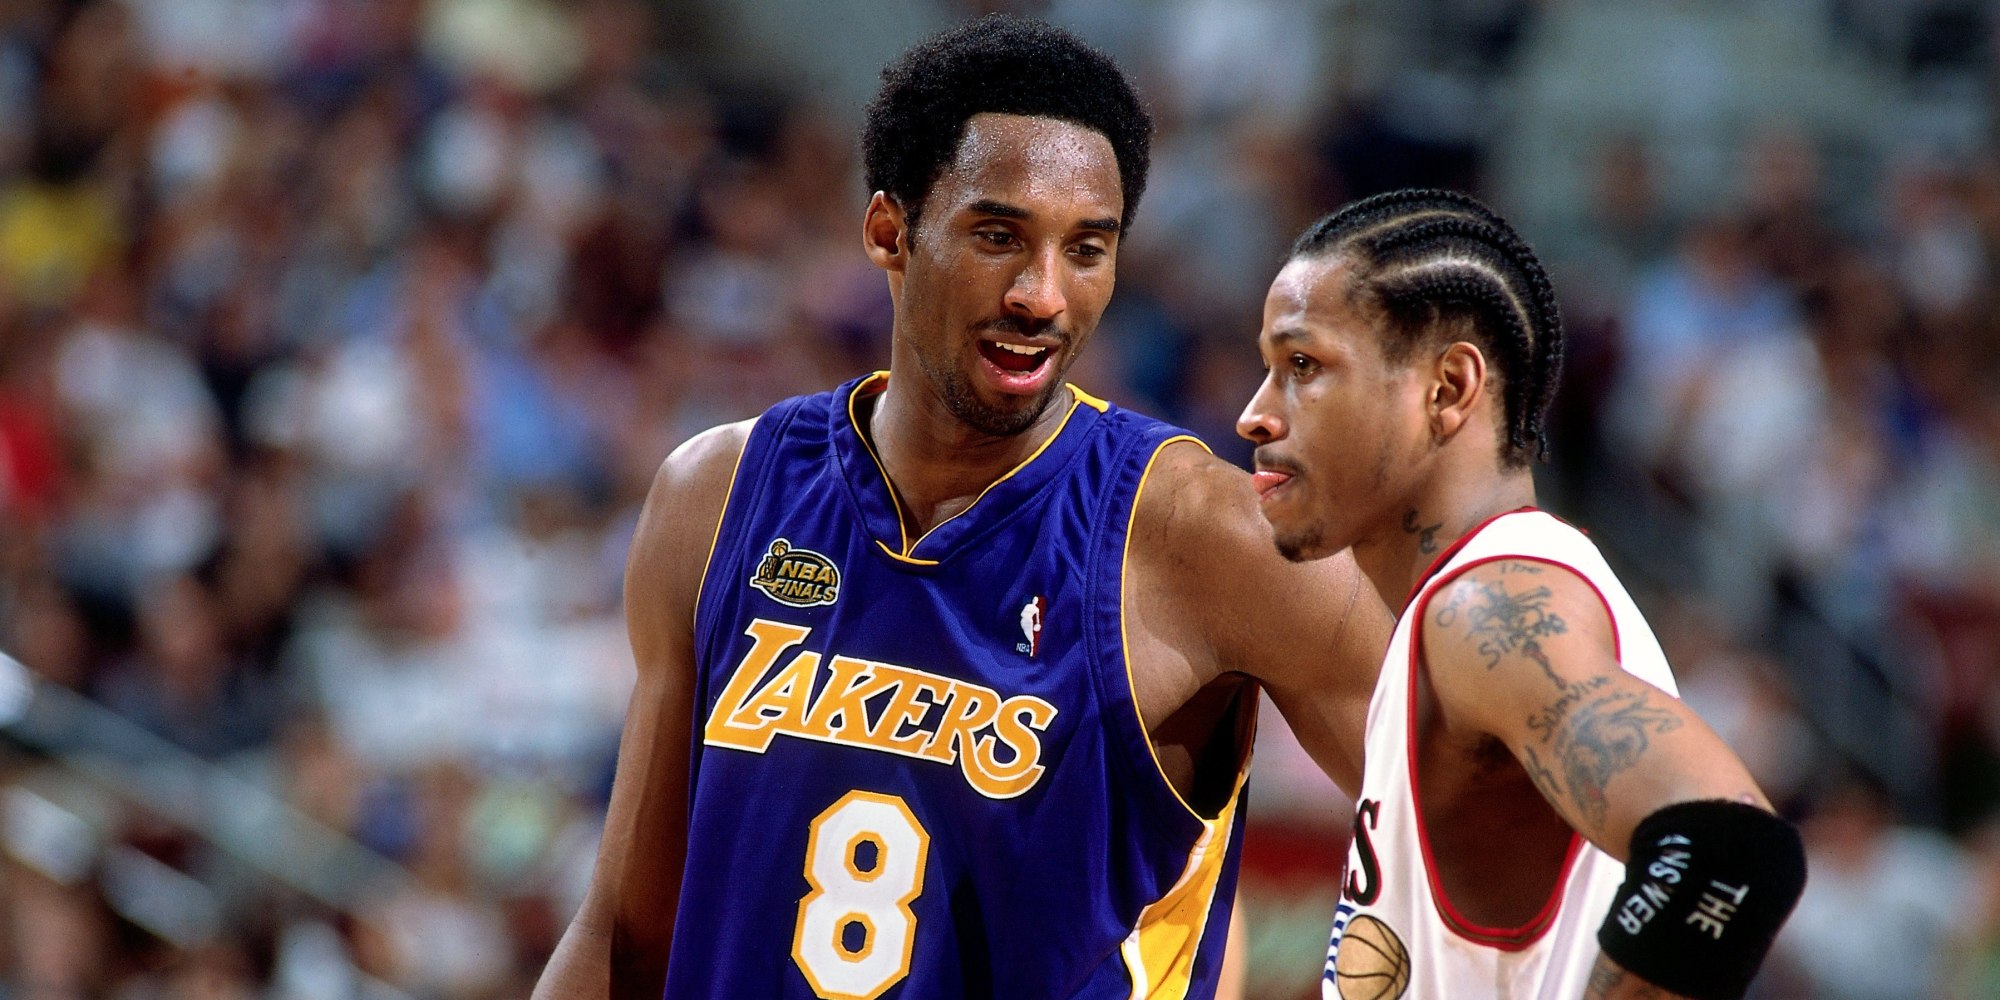 PHILADELPHIA - JUNE 15: Kobe Bryant #8 of the Los Angeles Lakers chats with Allen Iverson #3 of the Philadelphia76ers during game five of the 2001 NBA Finals played June 15, 2001 at the First Union Center in Philadelphia, Pennsylvania. NOTE TO USER: User expressly acknowledges that, by downloading and or using this photograph, User is consenting to the terms and conditions of the Getty Images License agreement. Mandatory Copyright Notice: Copyright 2001 NBAE (Photo by Andrew D. Bernstein/NBAE via Getty Images)